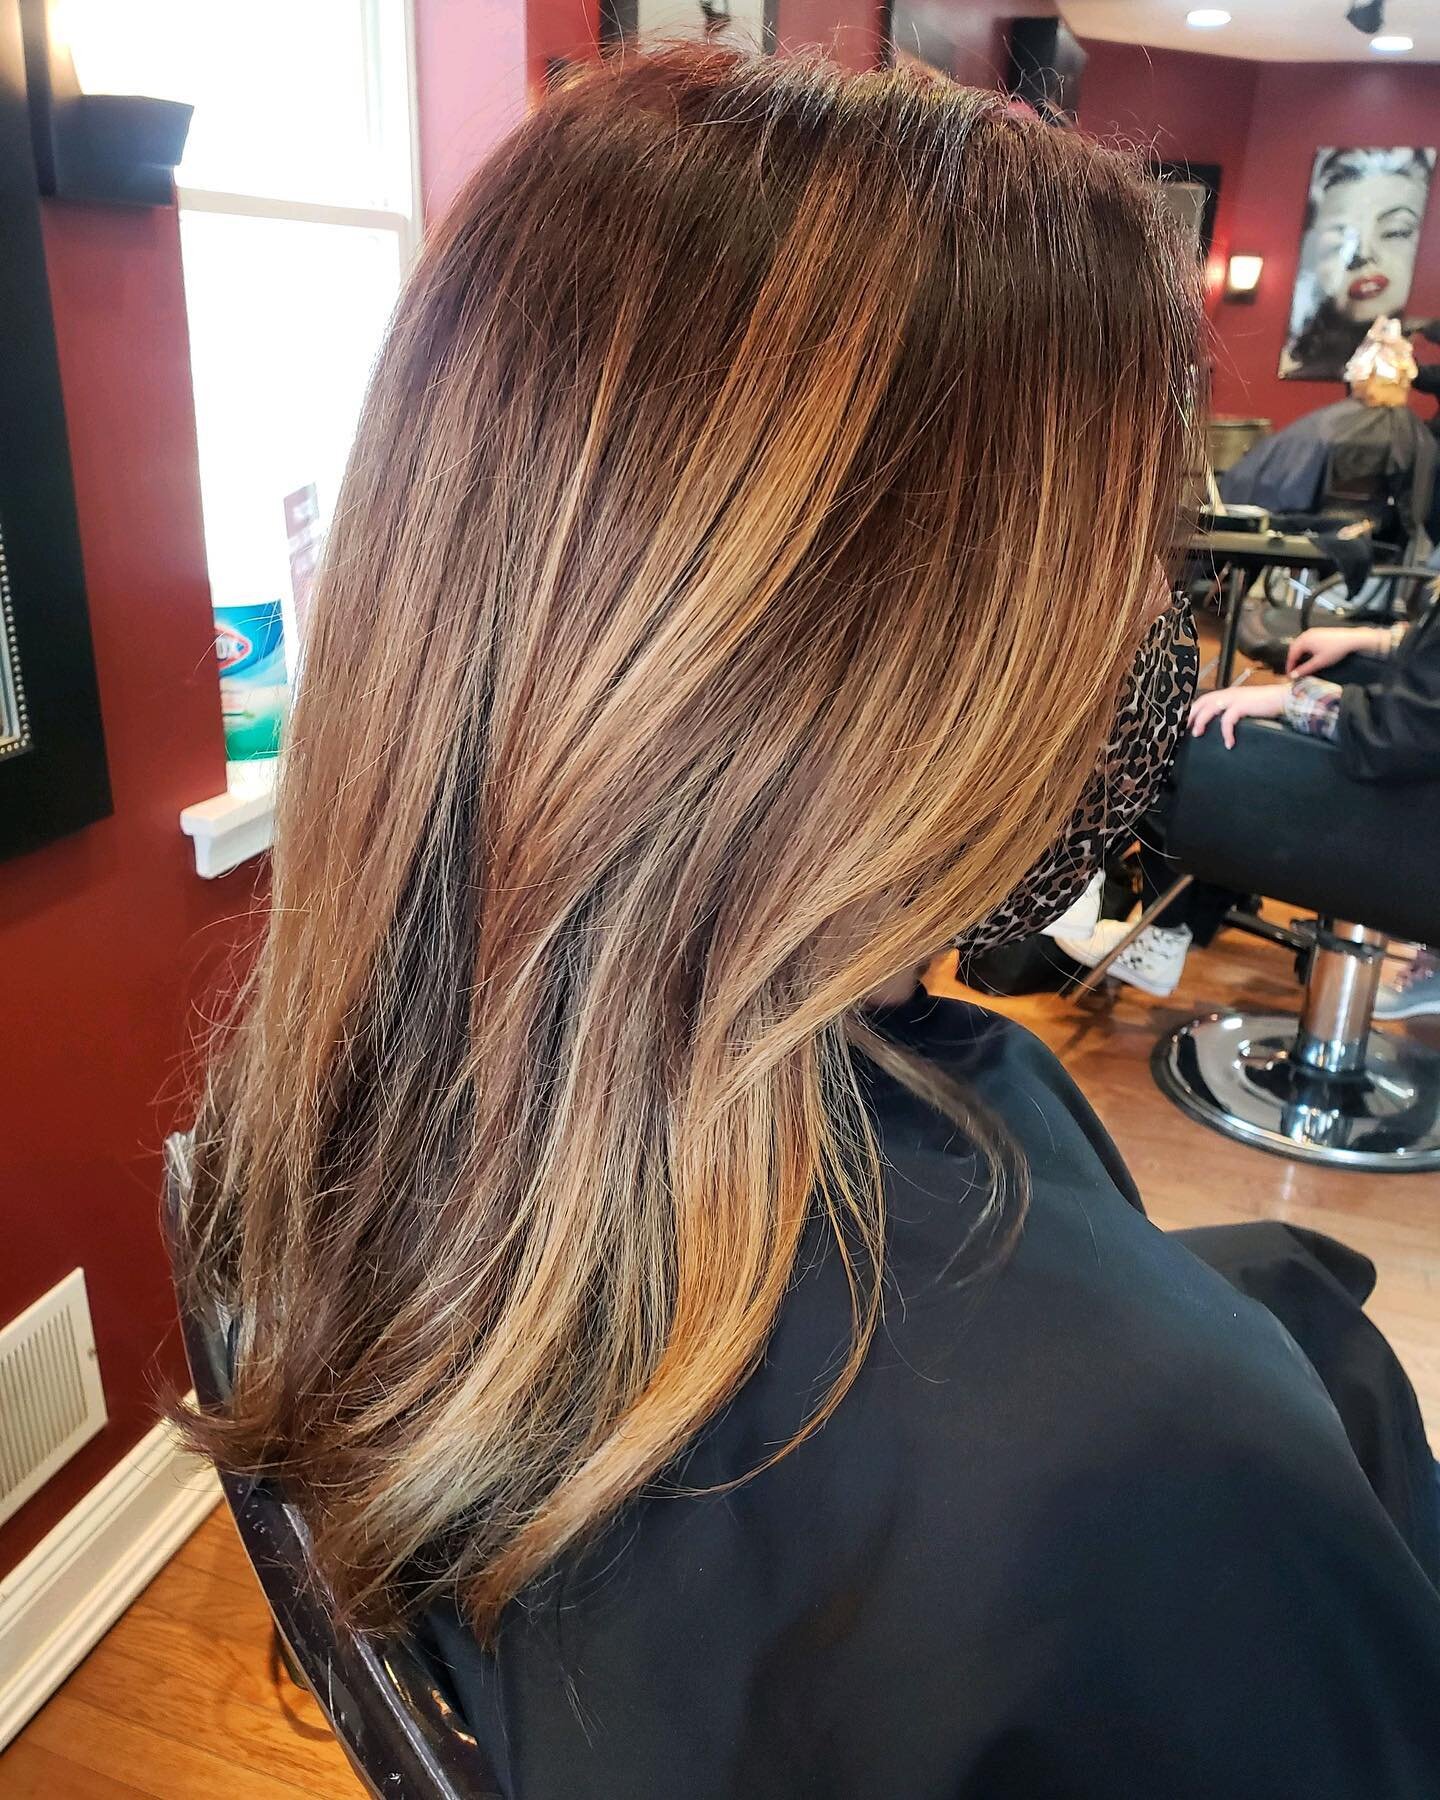 There&rsquo;s a another Amanda in town 😍 book today! 
.
Hairstylist: Amanda D💇🏻&zwj;♀️
.
.
.
#lexsalon #phoenixvillehair #phoenixville  #phoenixvillepa #phoenixvillehairstylist #pville #pvillehair #pottstownhairstylist #mainlinehairstylist #lowlig